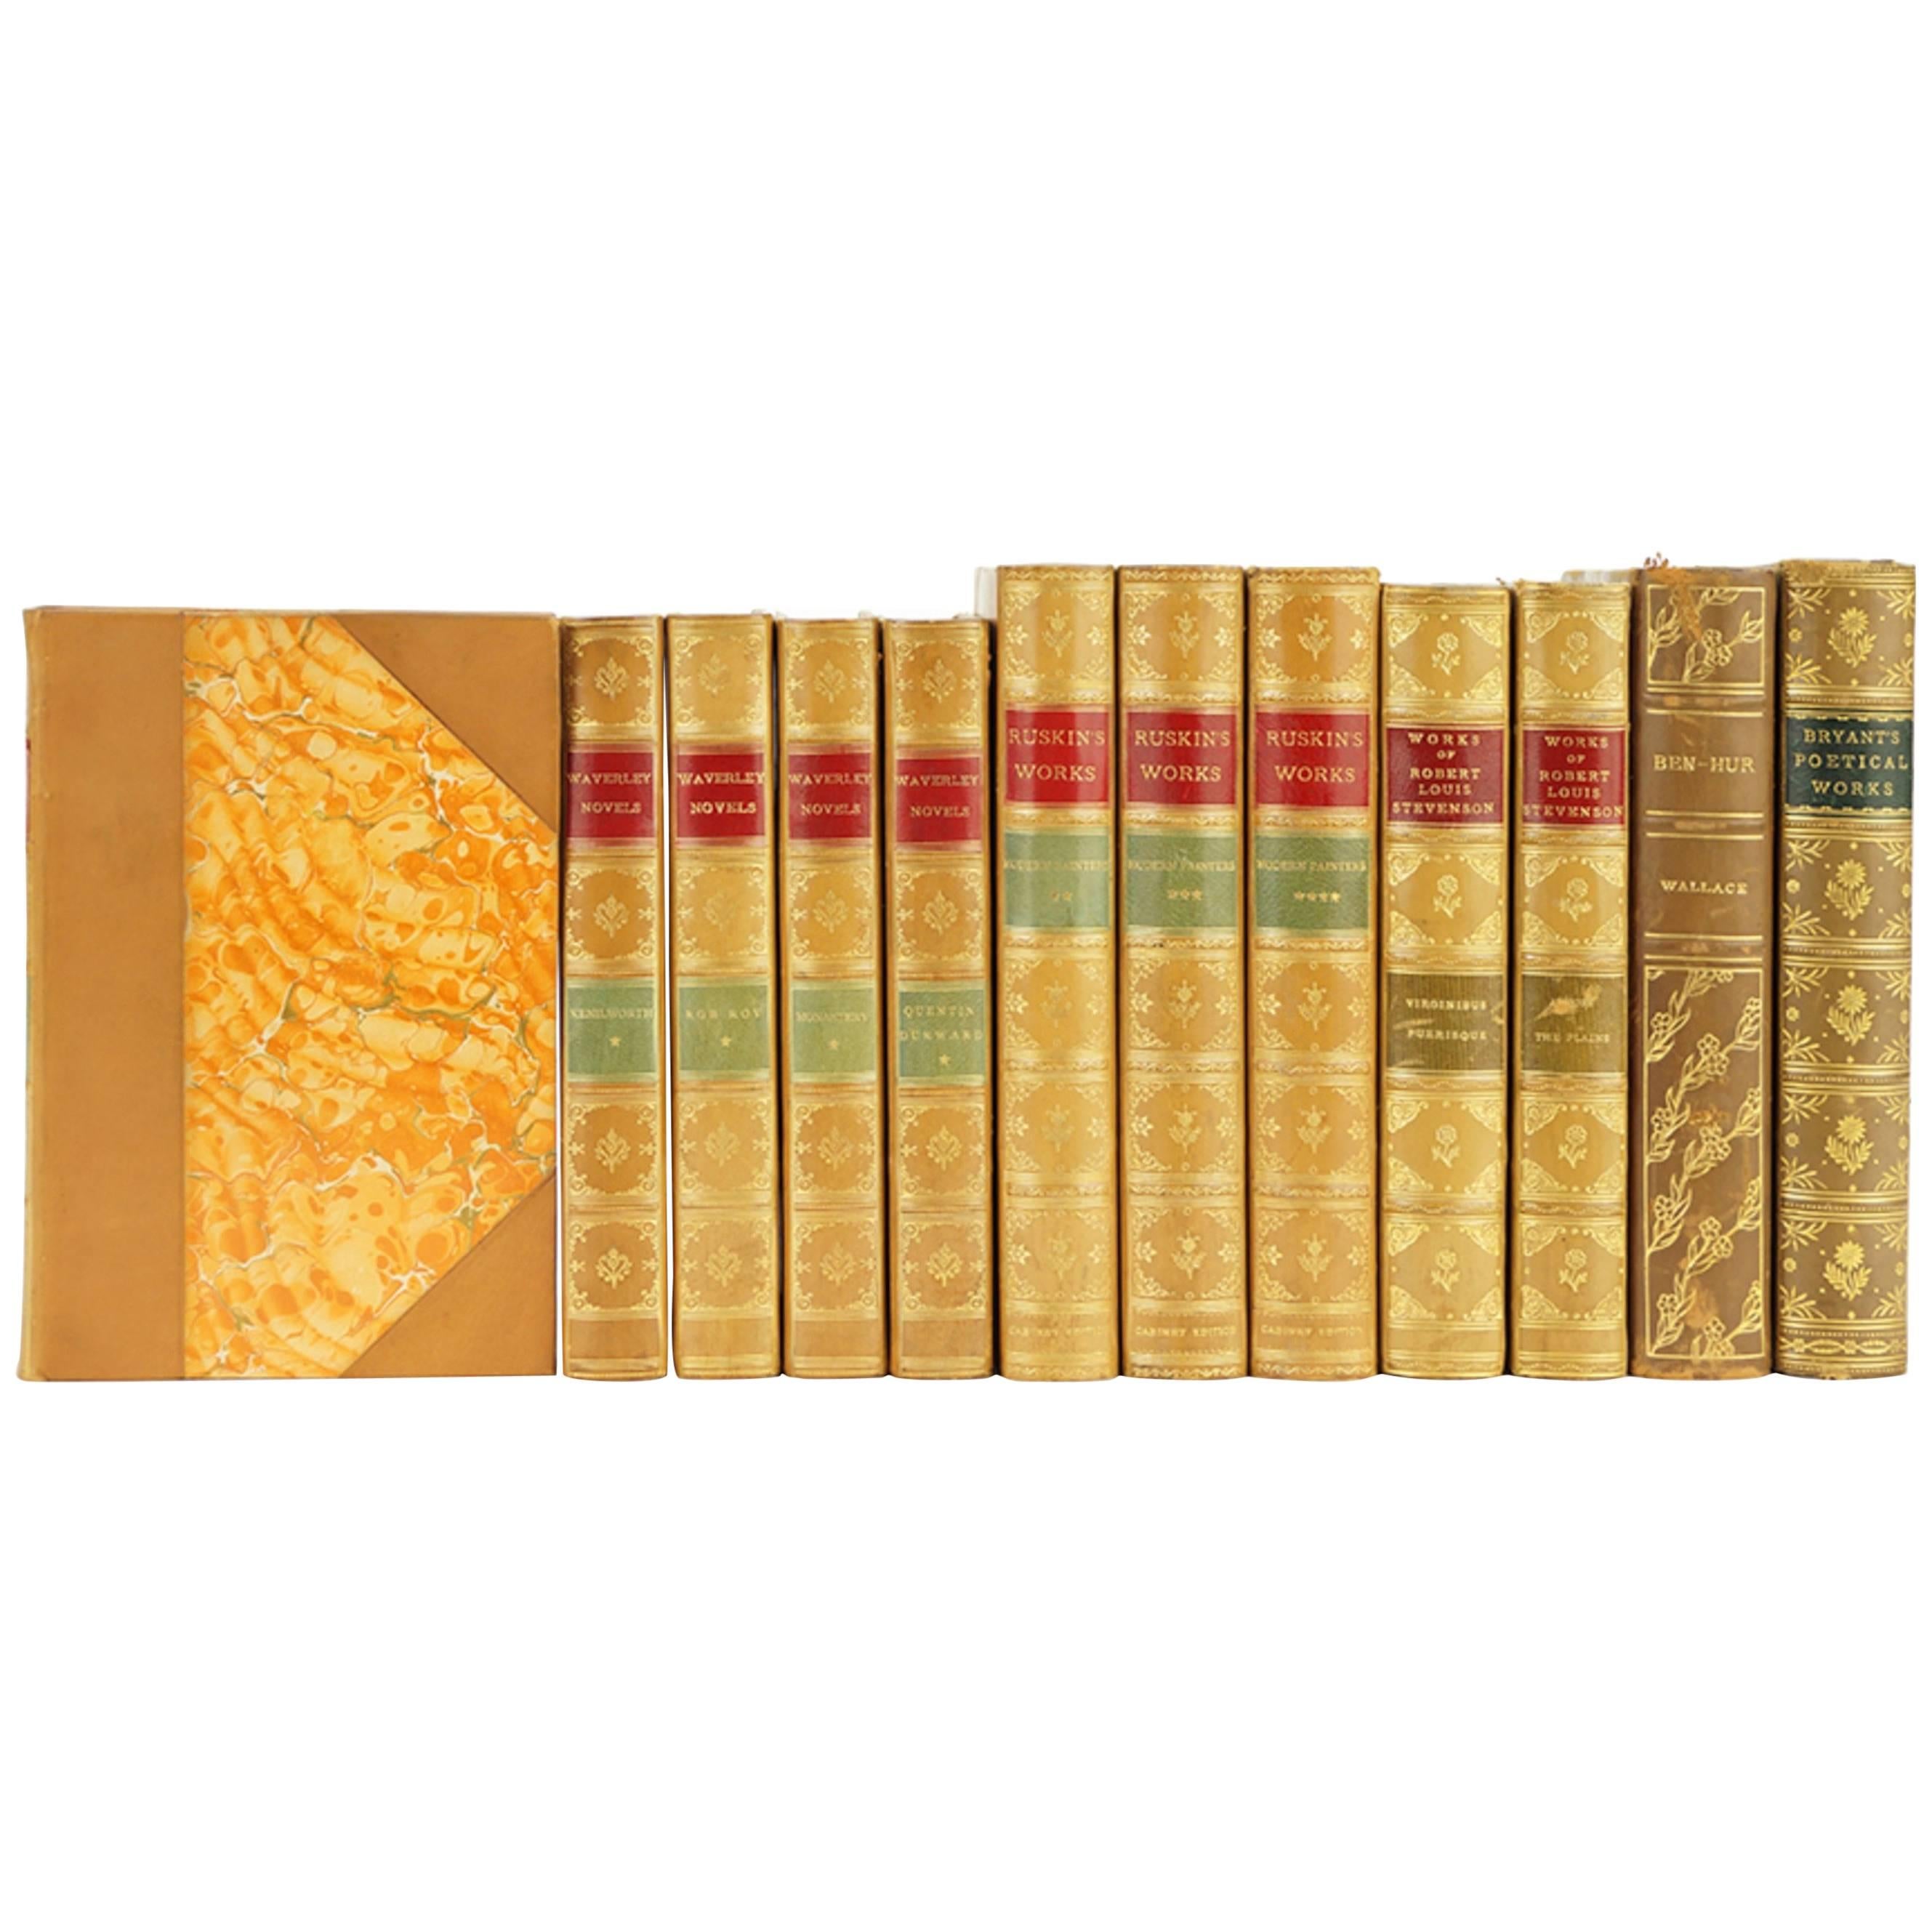 Collection of 300 Leather Bound Books with Gilt Tooling